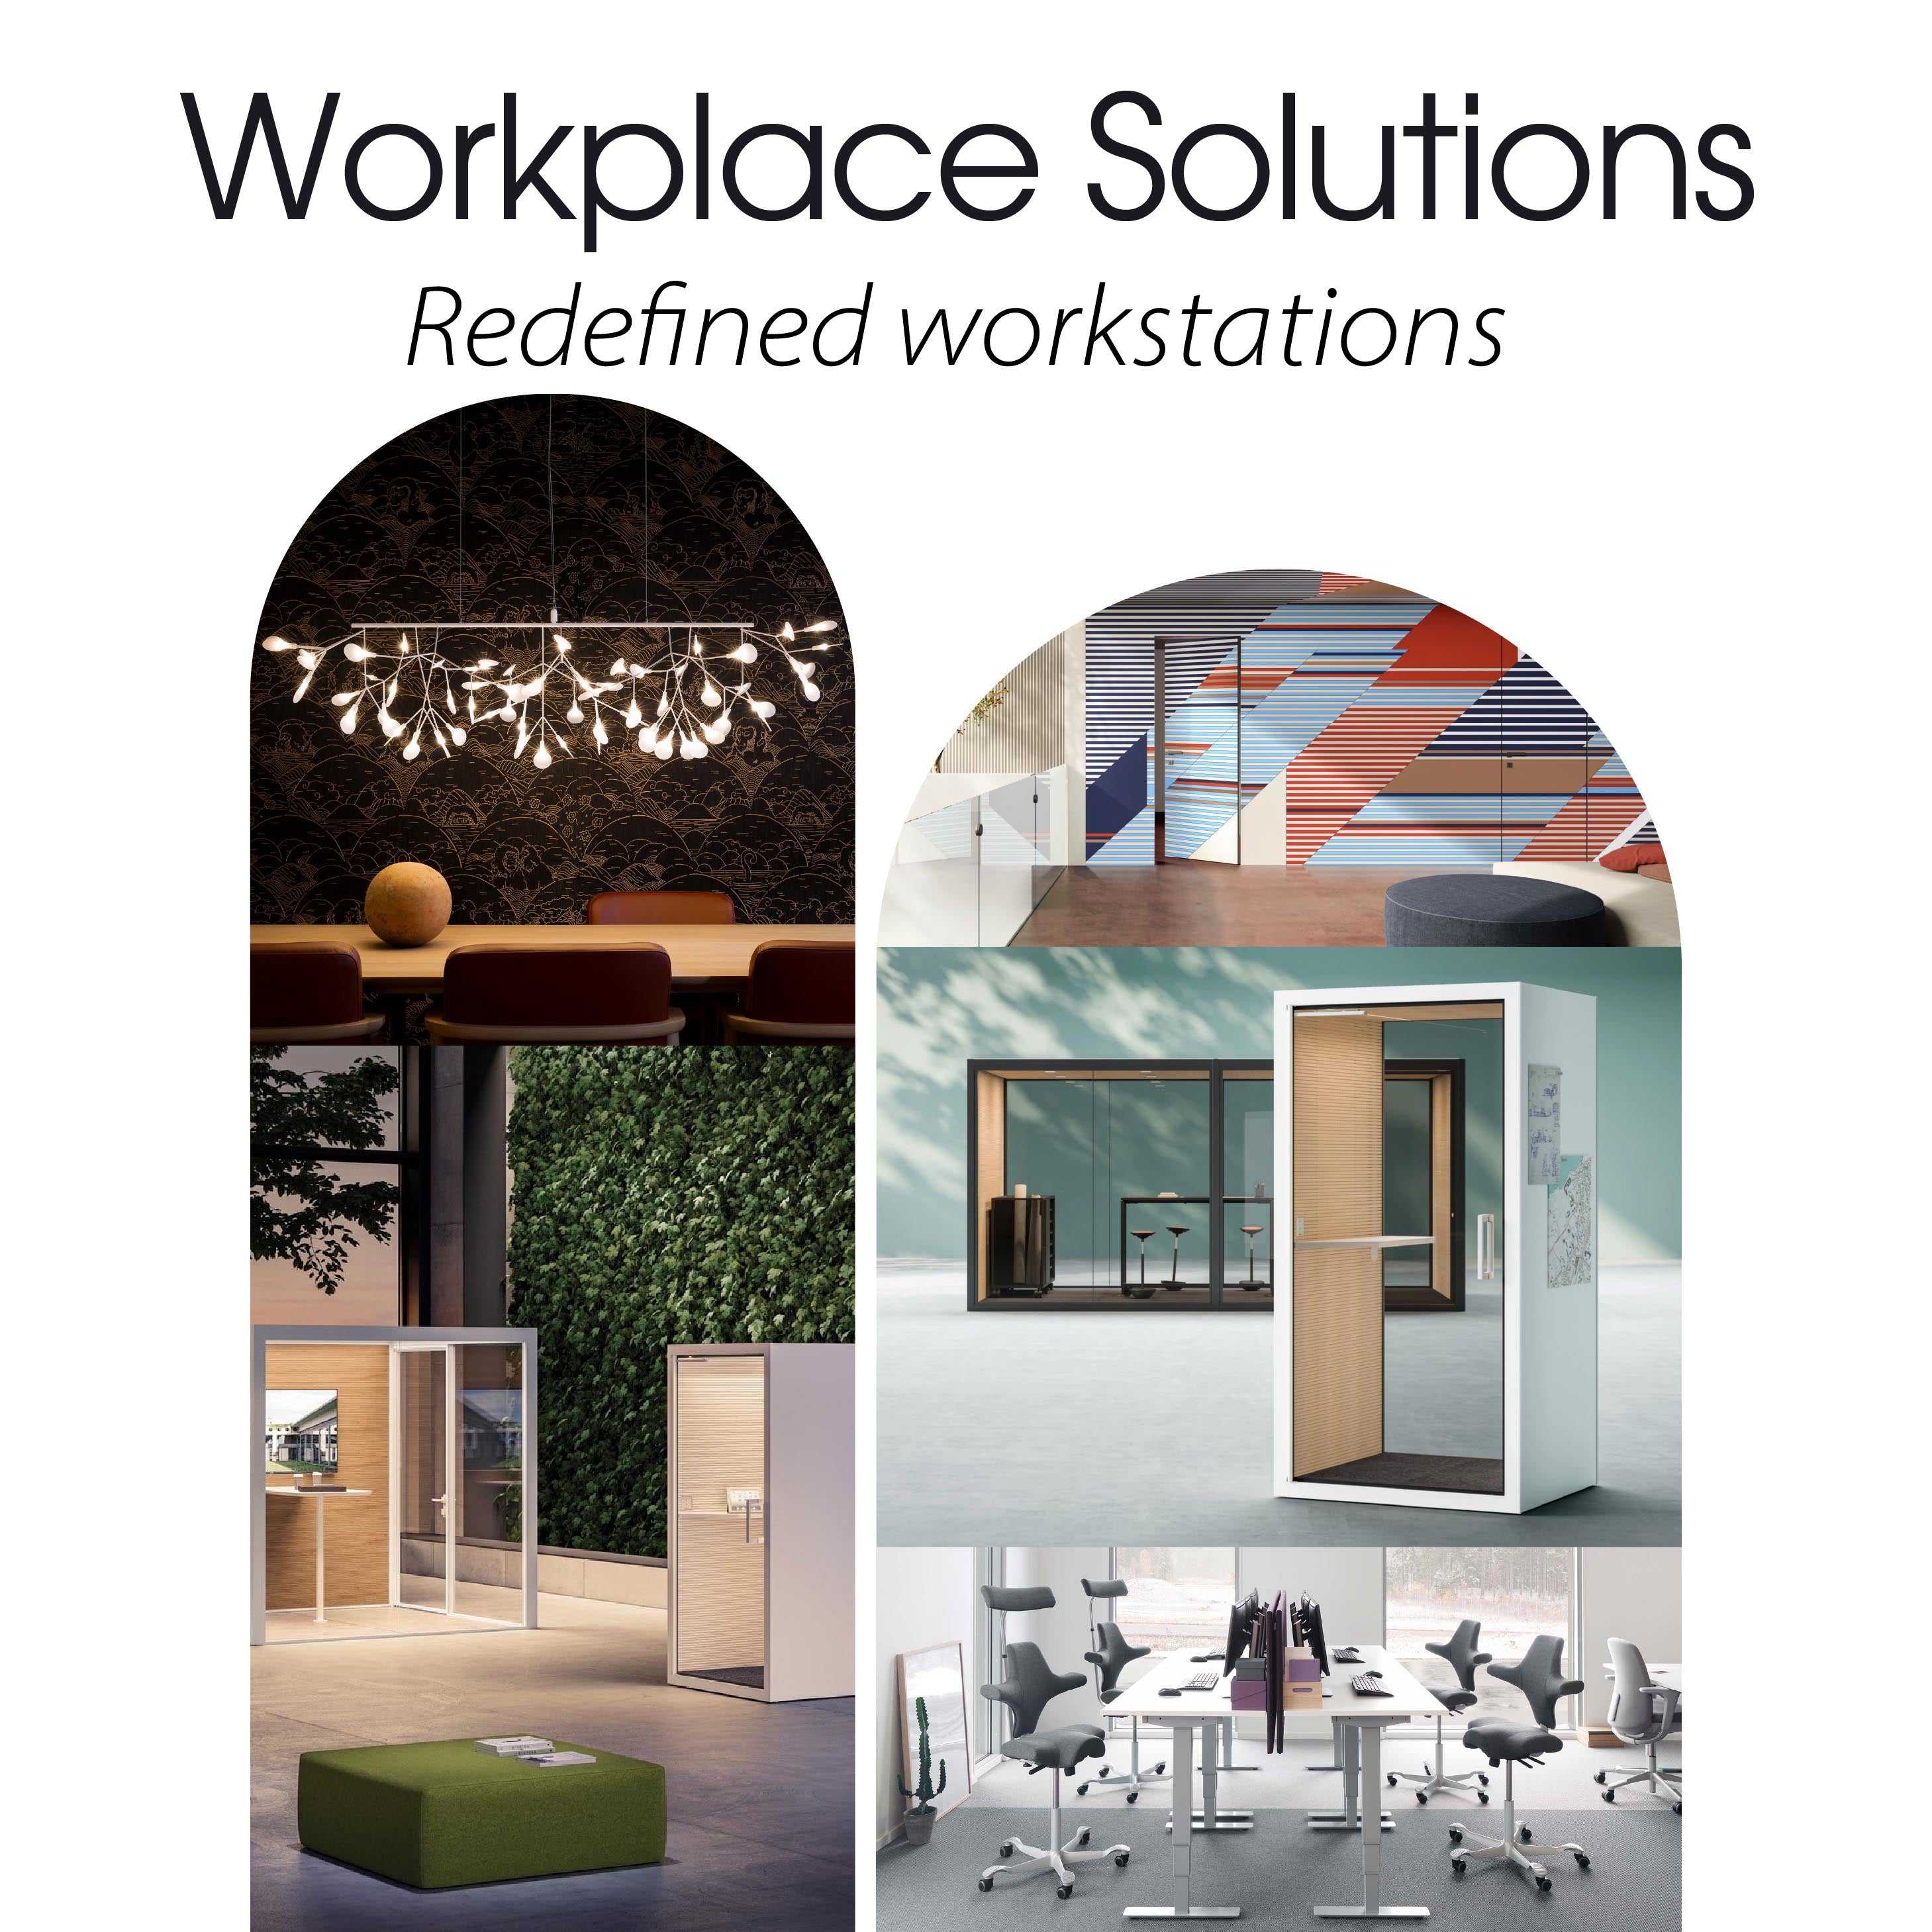 WORKPLACE SOLUTIONS | REDEFINED WORKSTATIONS